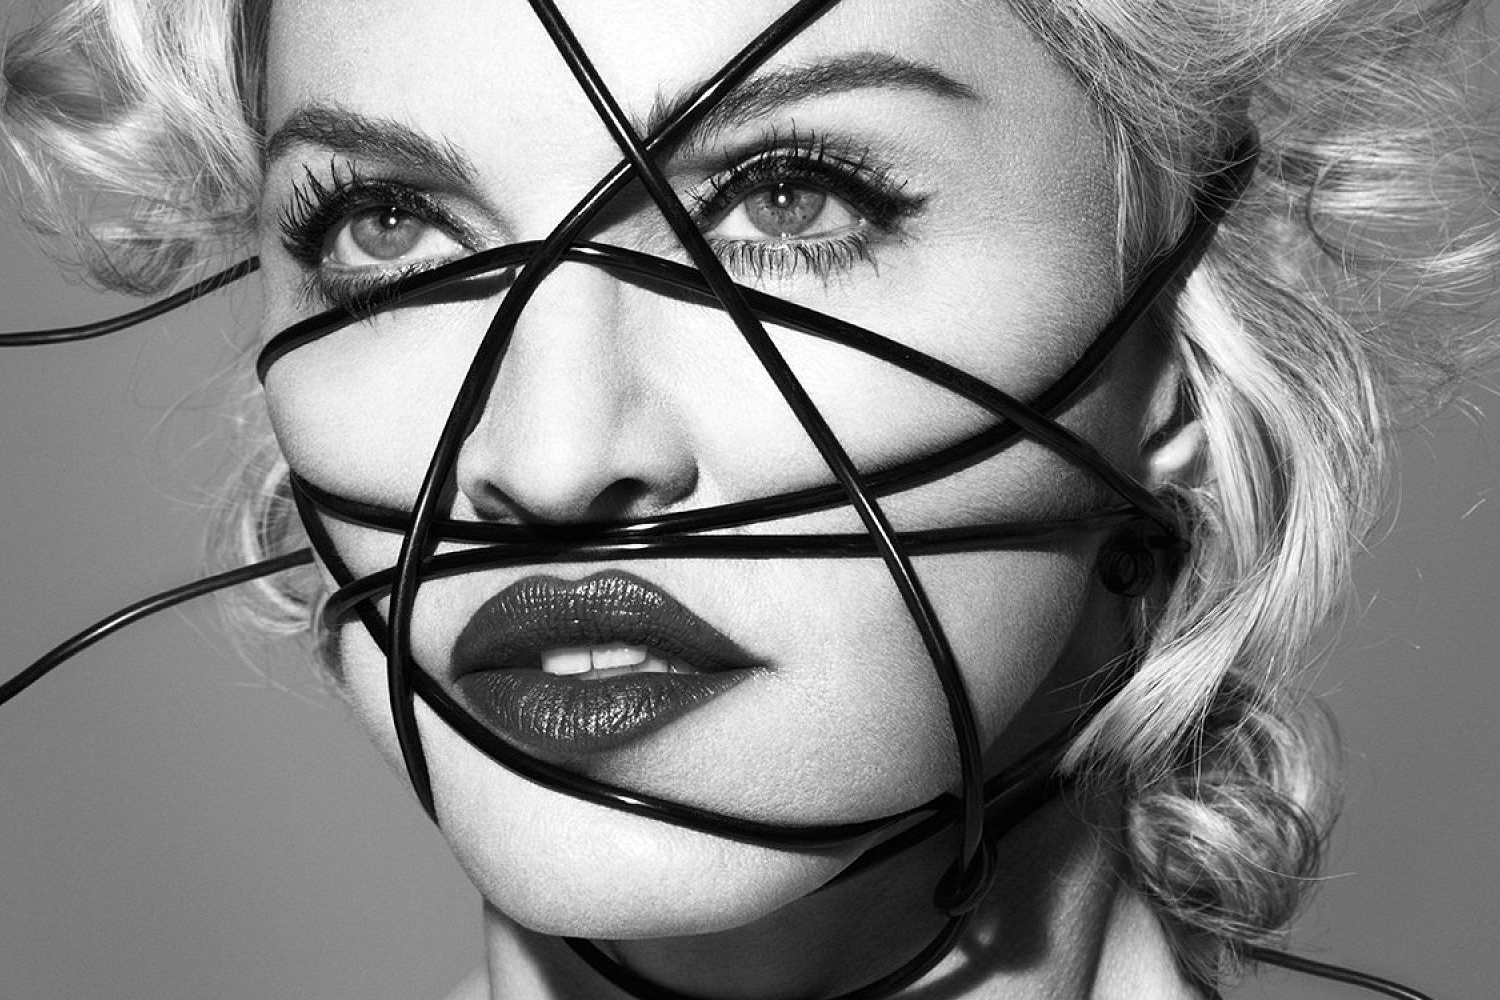 Chance The Rapper and Mike Tyson to feature on new Madonna track